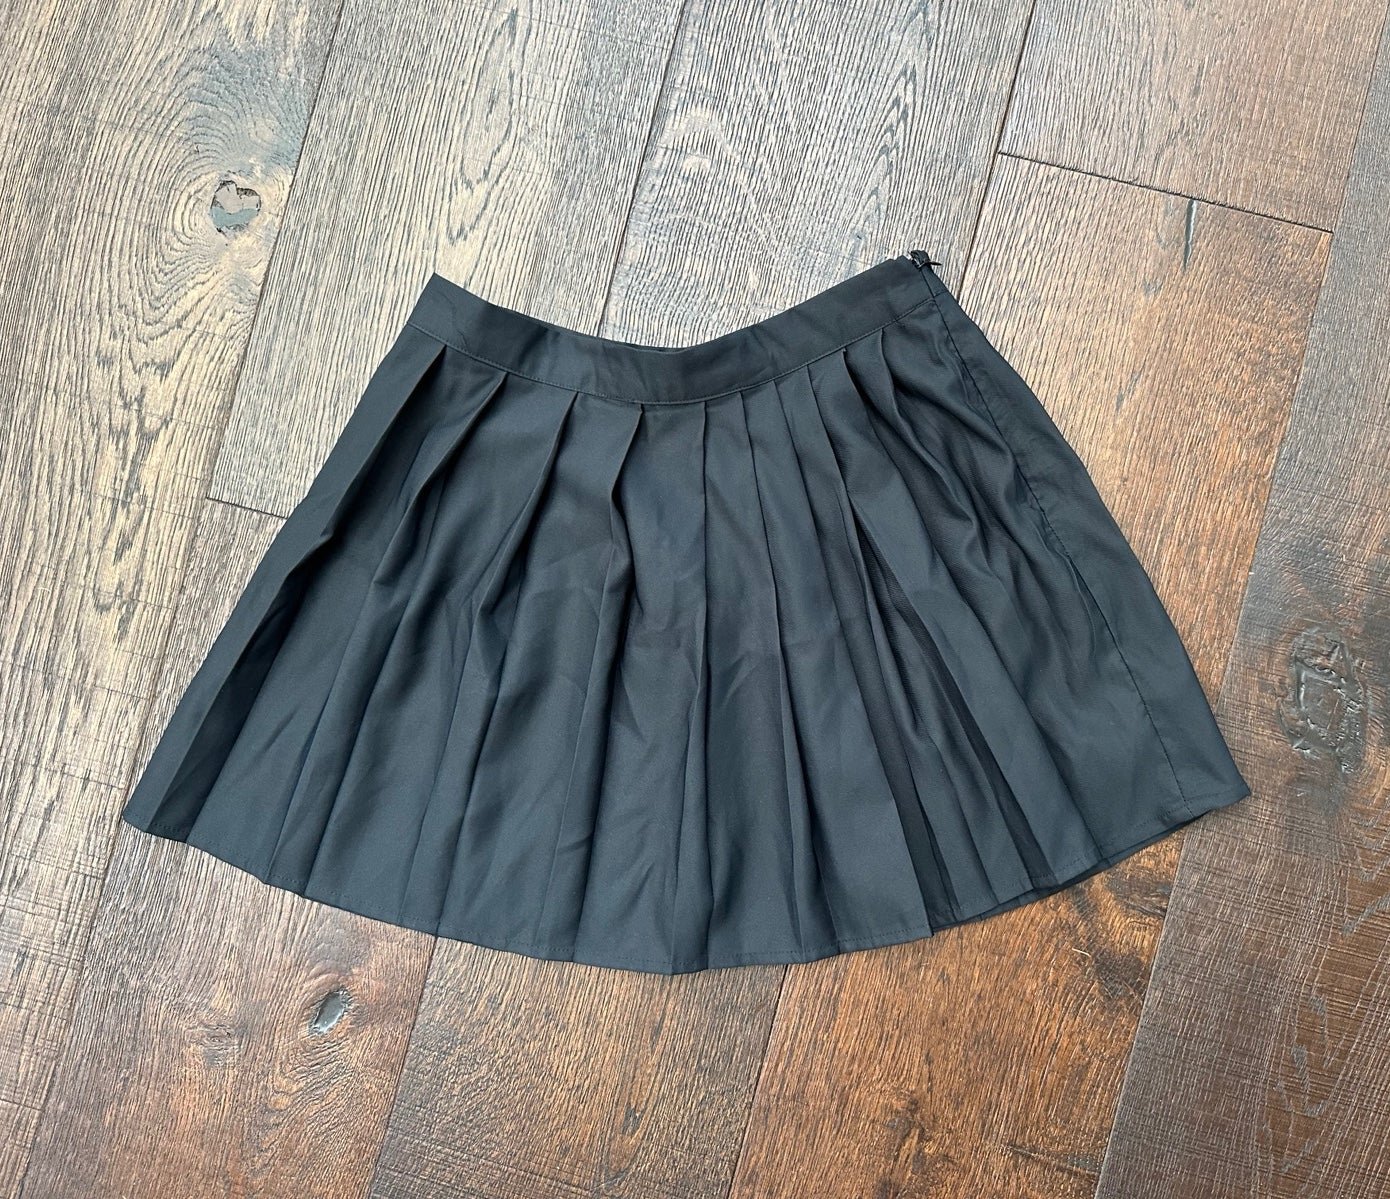 floor price Pleated Skirt j5CaoSb4F for sale